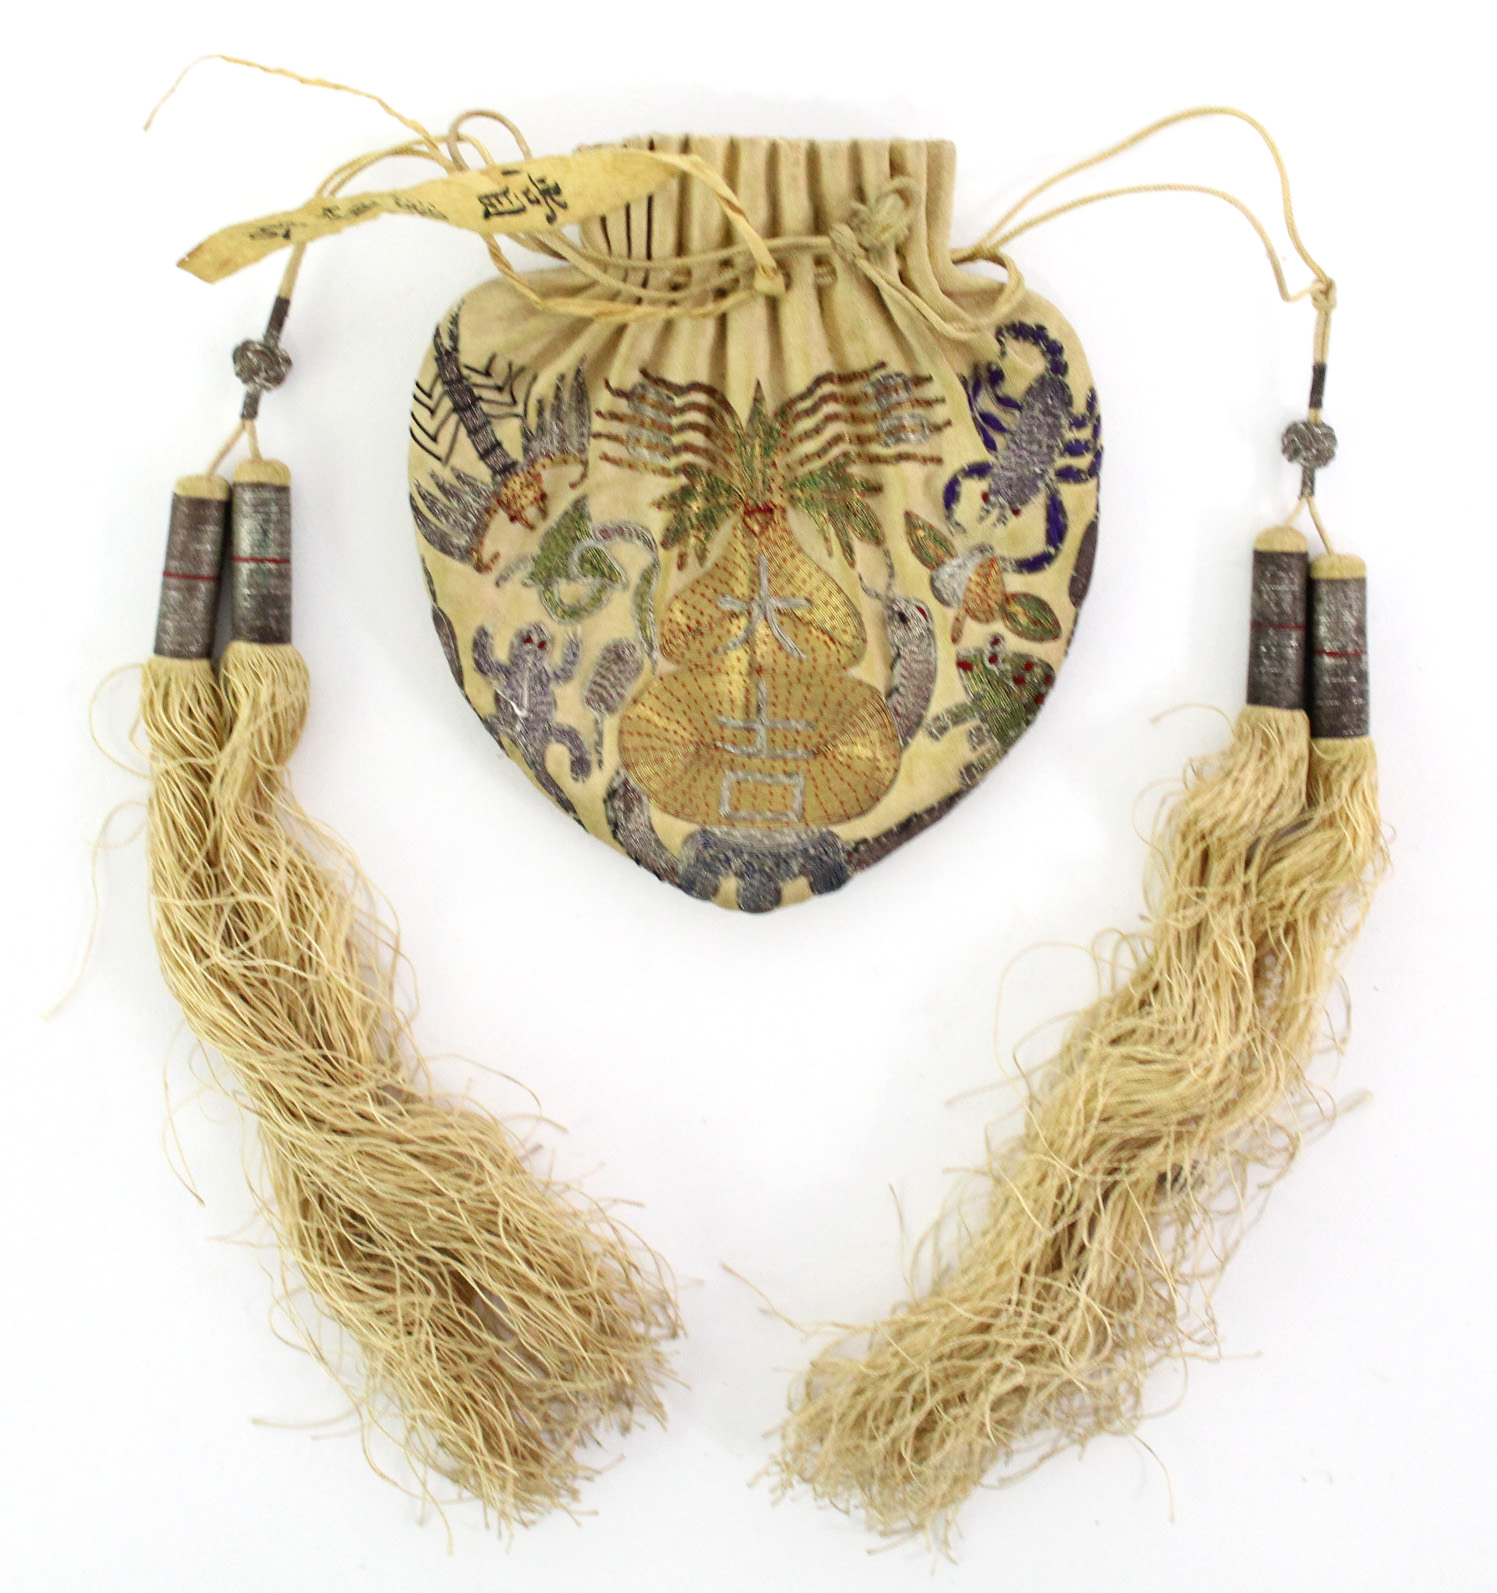 A late 19th/early 20th century Chinese silk purse decorated in gold, silver, & coloured thread